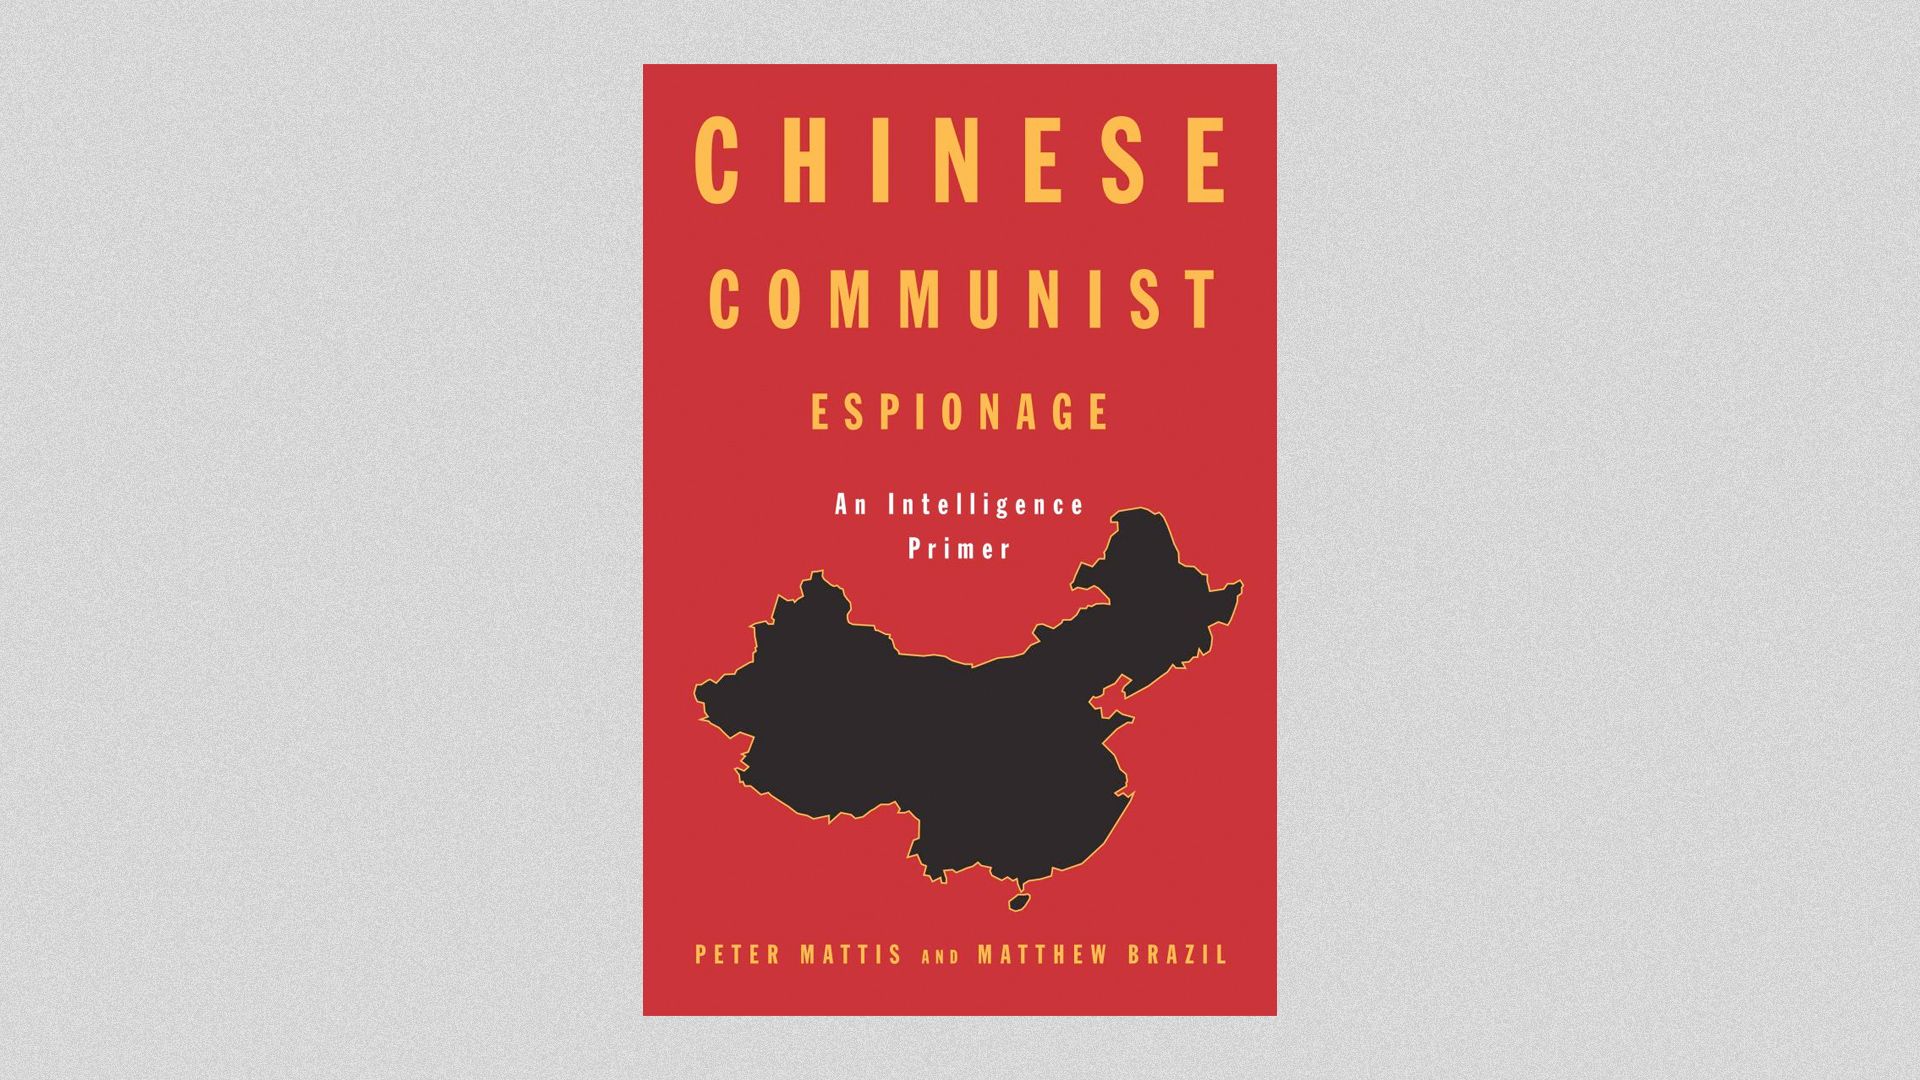 The front cover of the book Chinese Communist Espionage: An Intelligence Primer